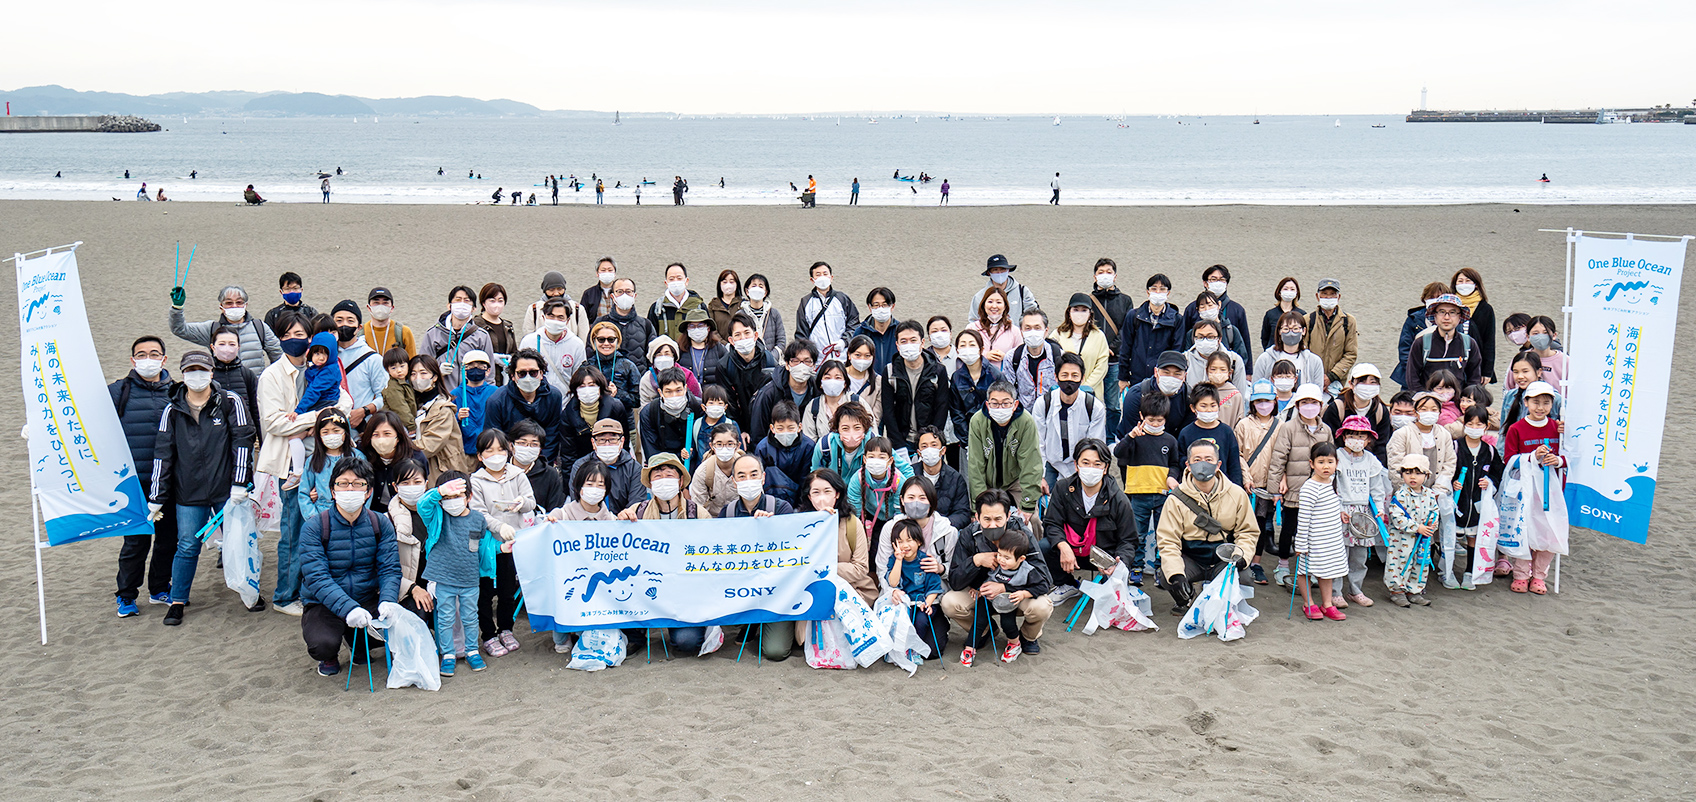 Many participants gathered on the beach with "One Blue Ocean" banners